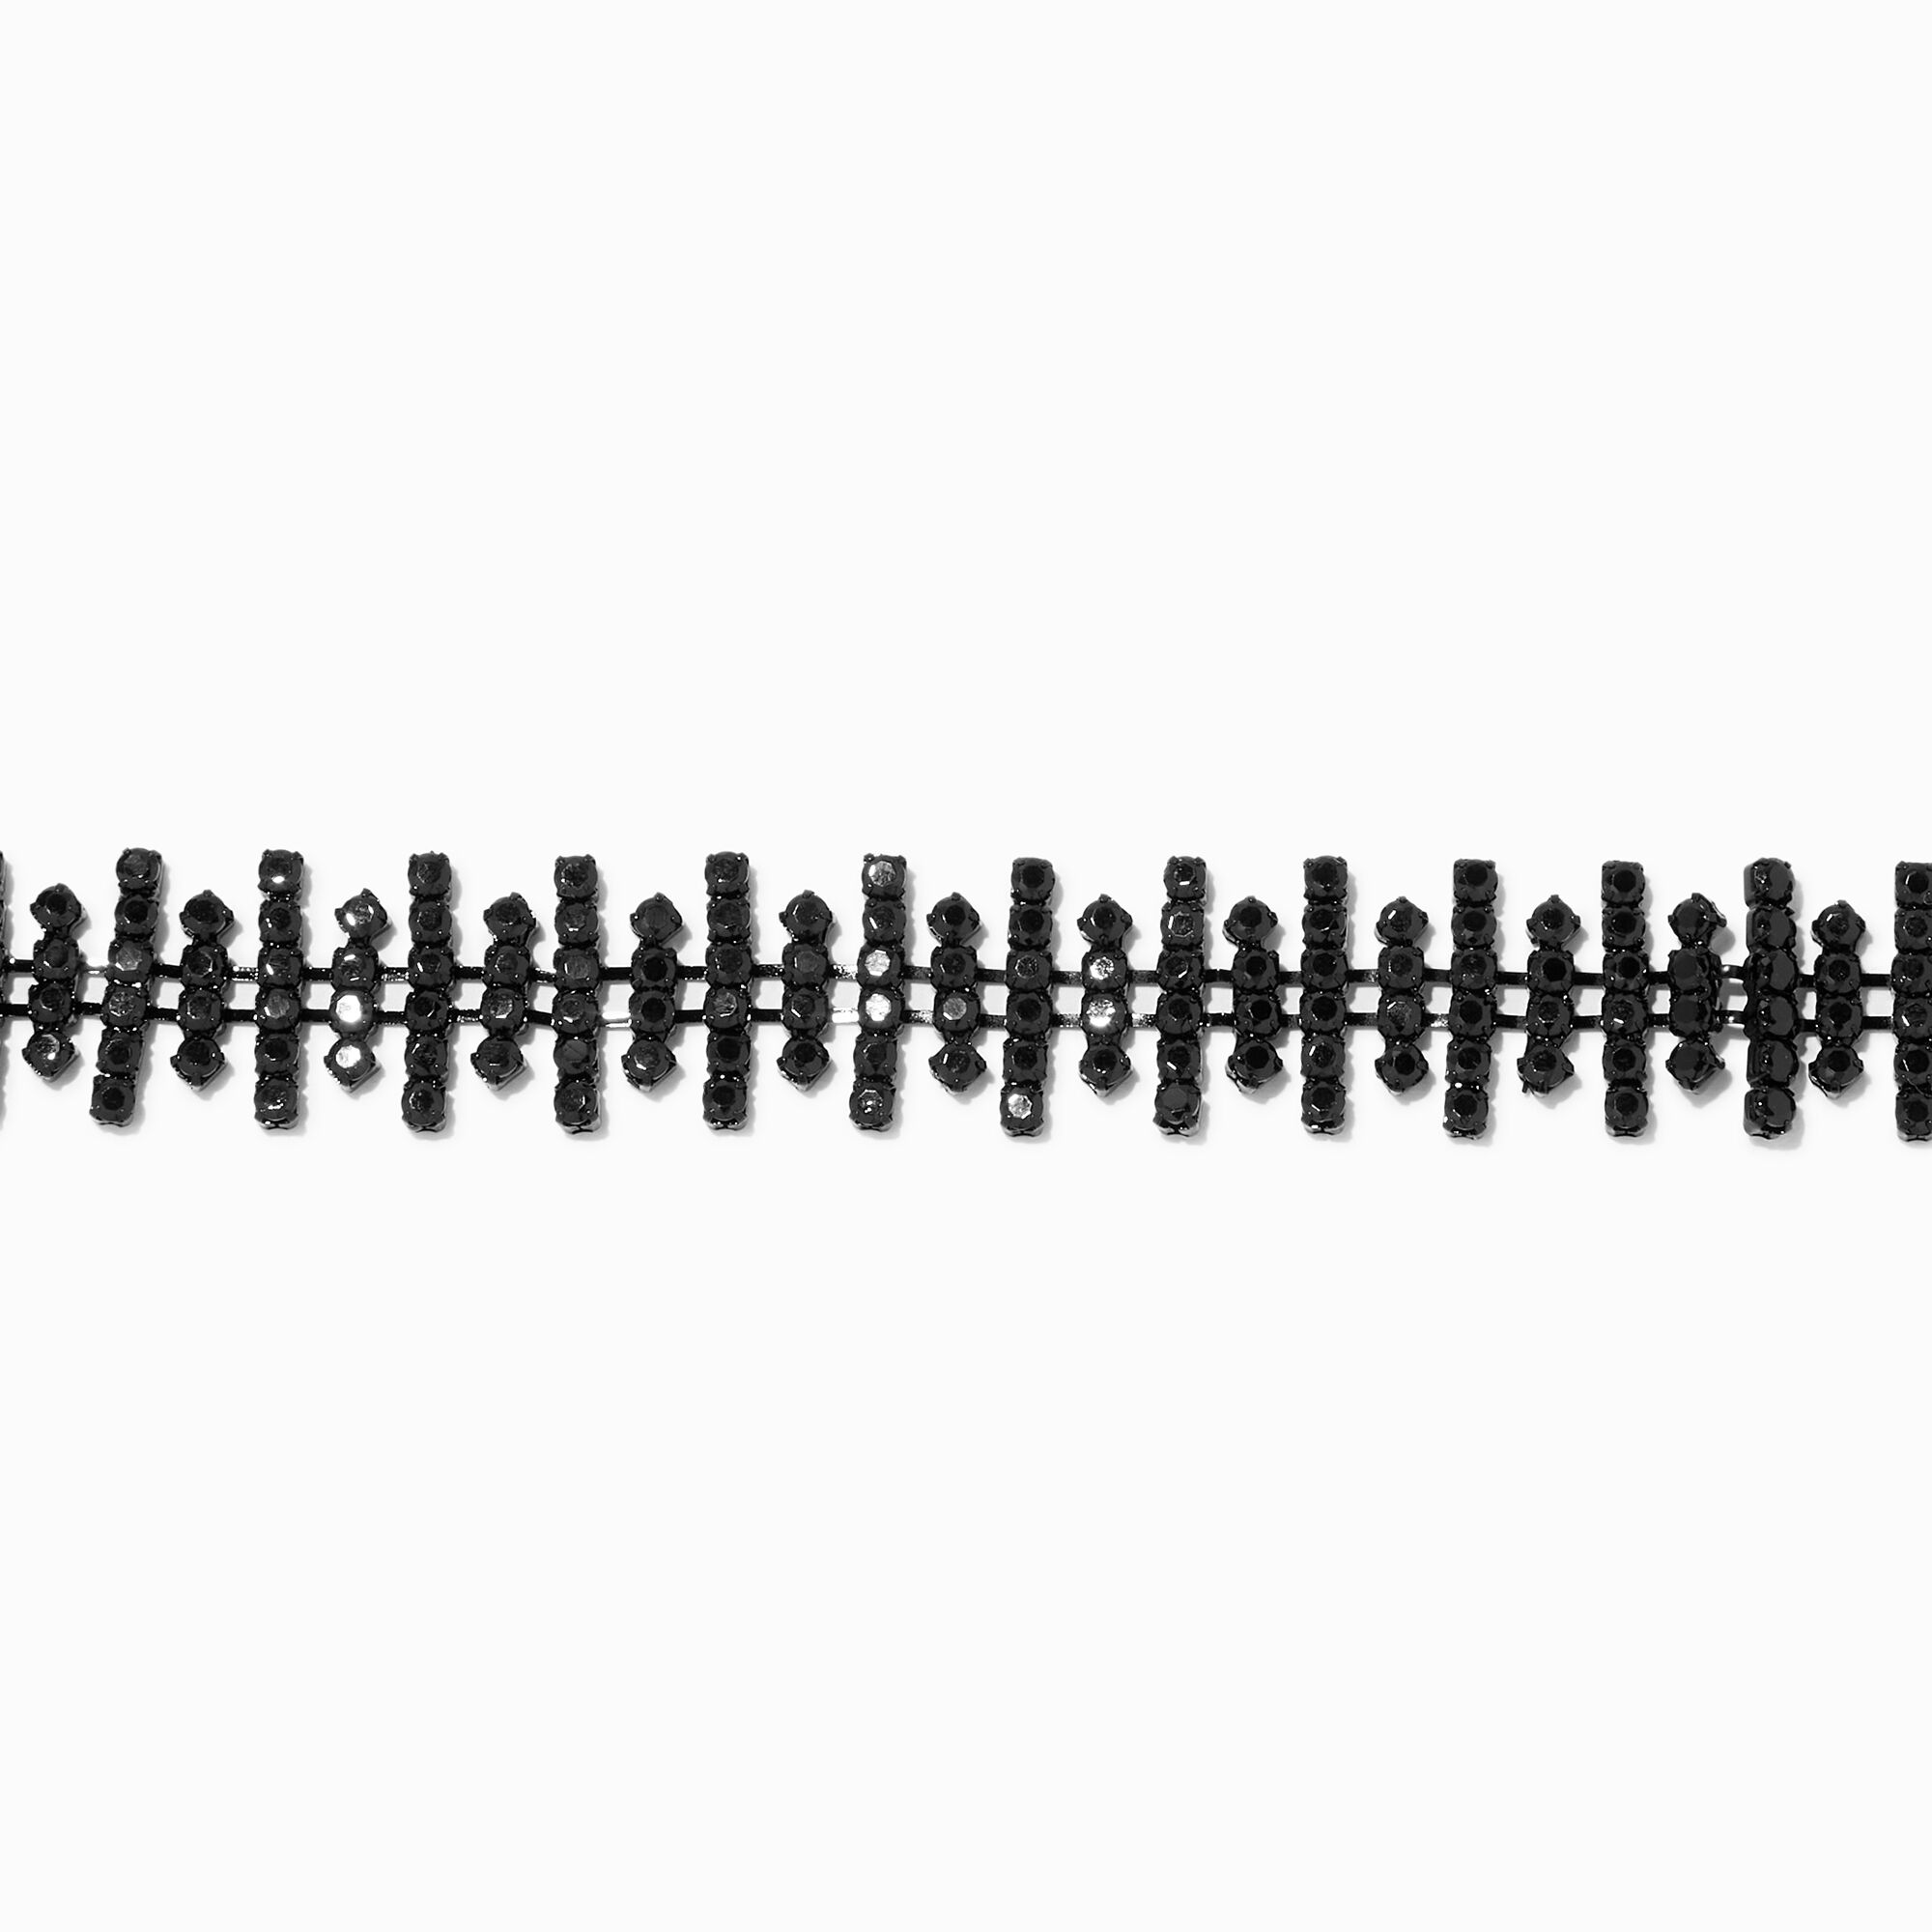 View Claires Jet Spikey Choker Necklace Black information